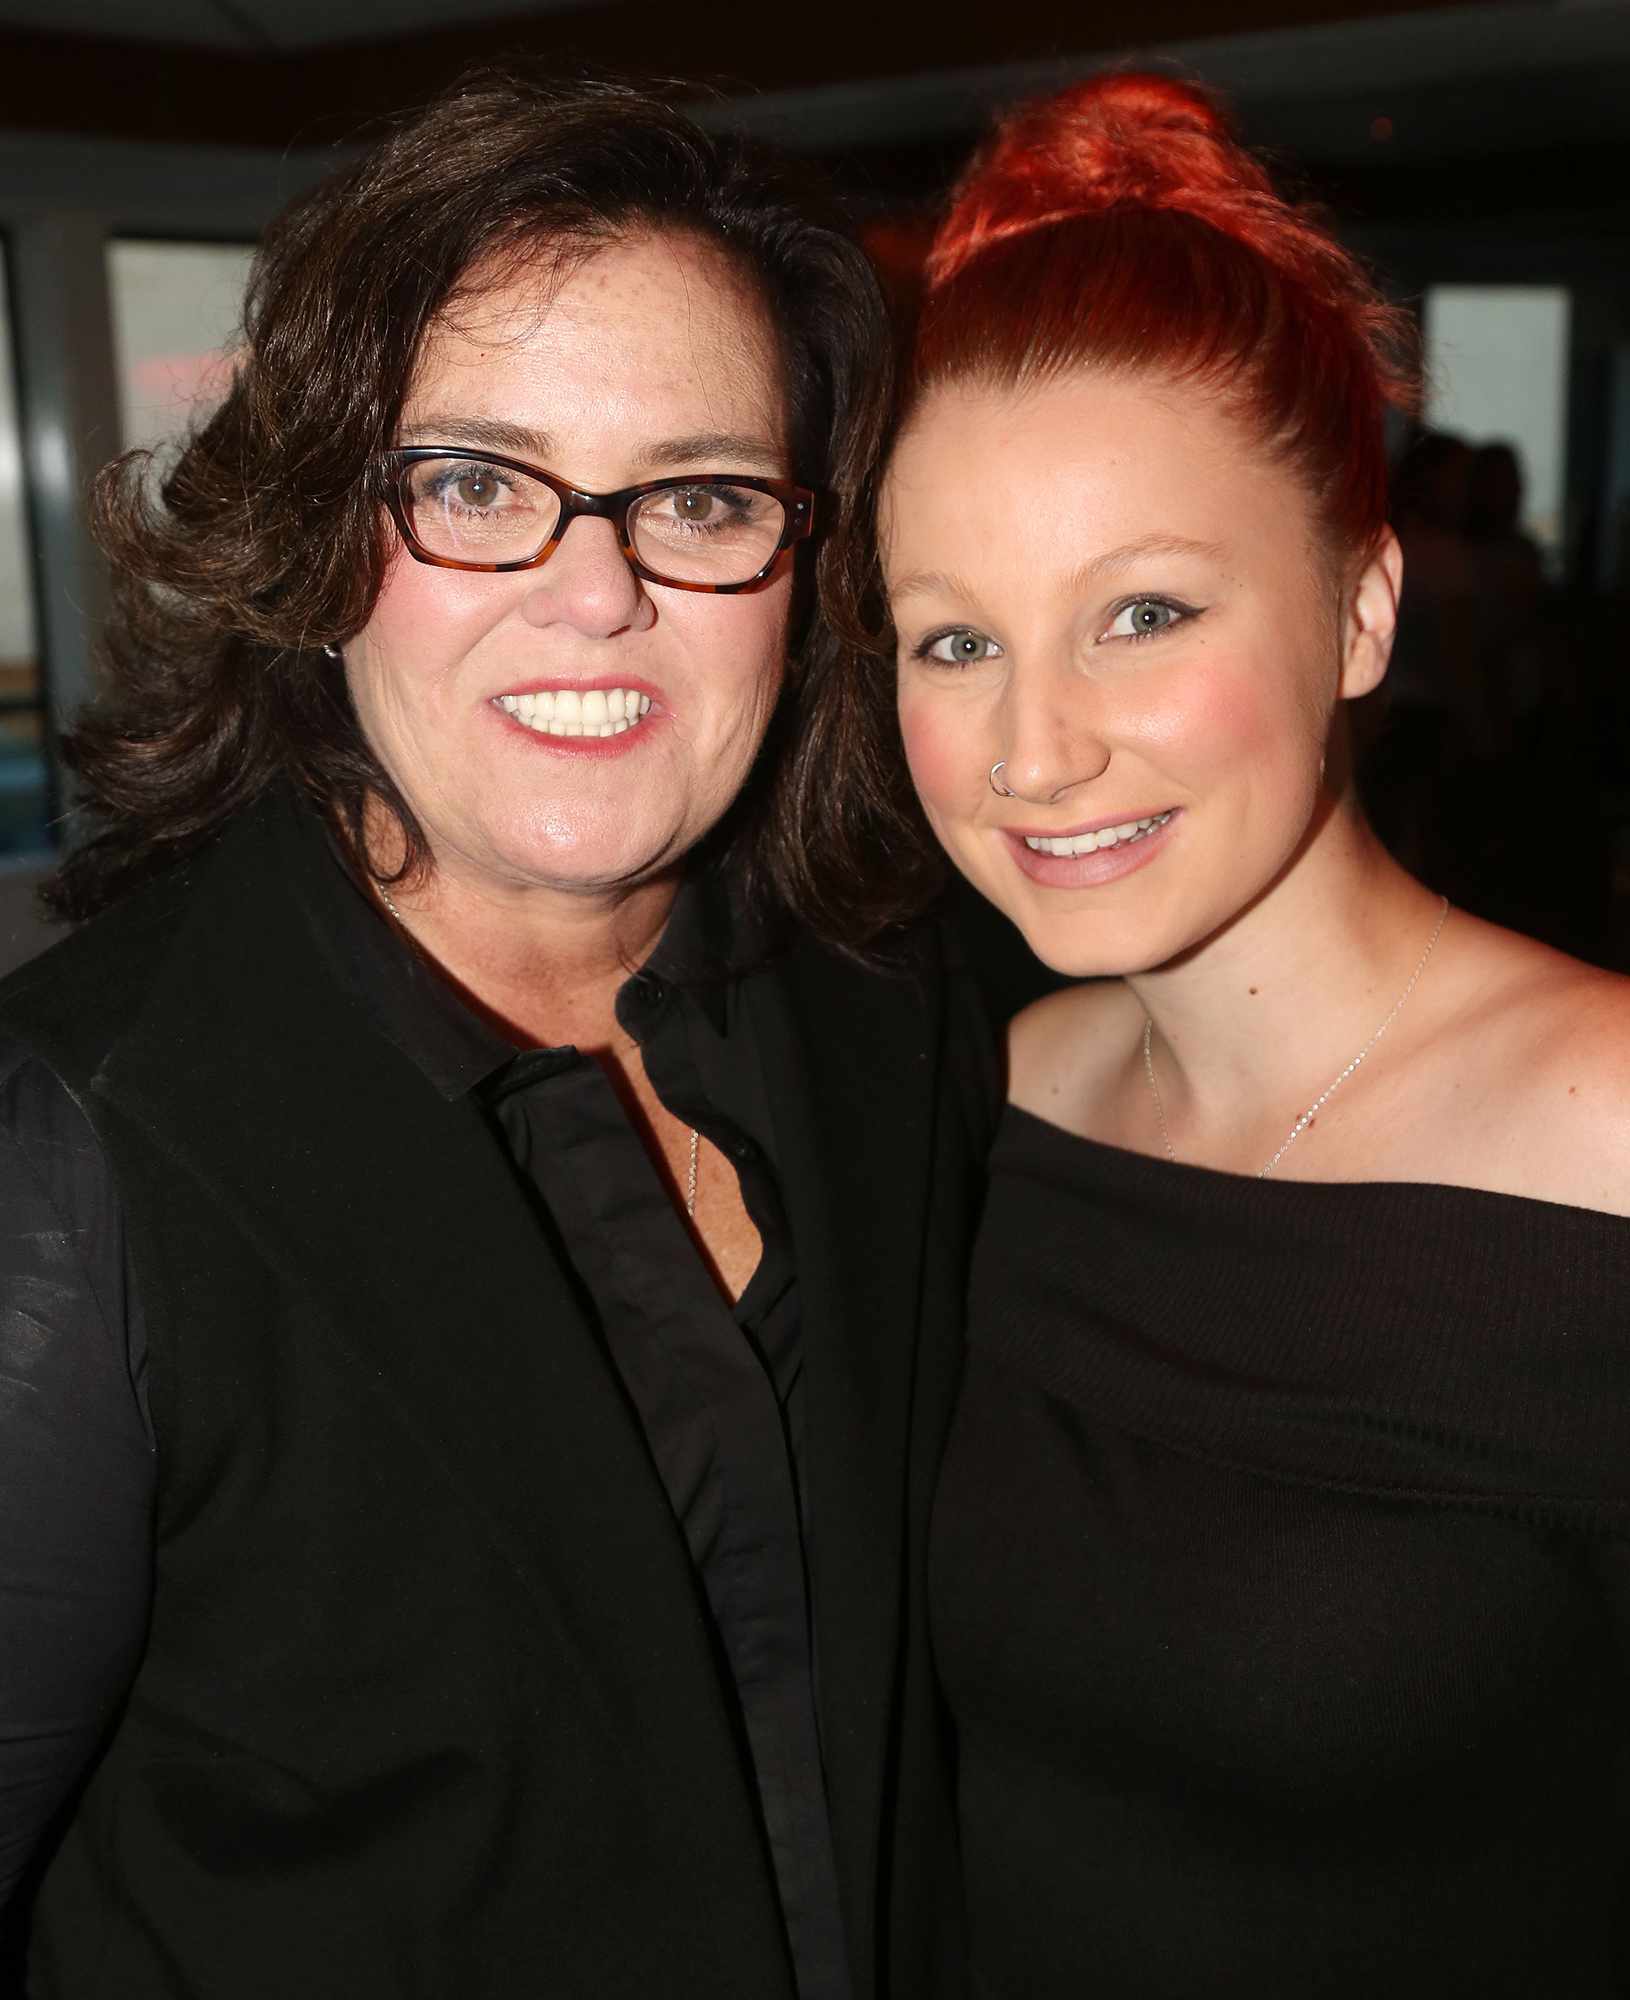 Rosie O'Donnell and Chelsea Belle O'Donnell pose at the "2nd Annual Fran Drescher Cancer Schmancer Sunset Cabaret Cruise" on The SS Hornblower Infinity Crusie Ship on June 20, 2016 in New York City